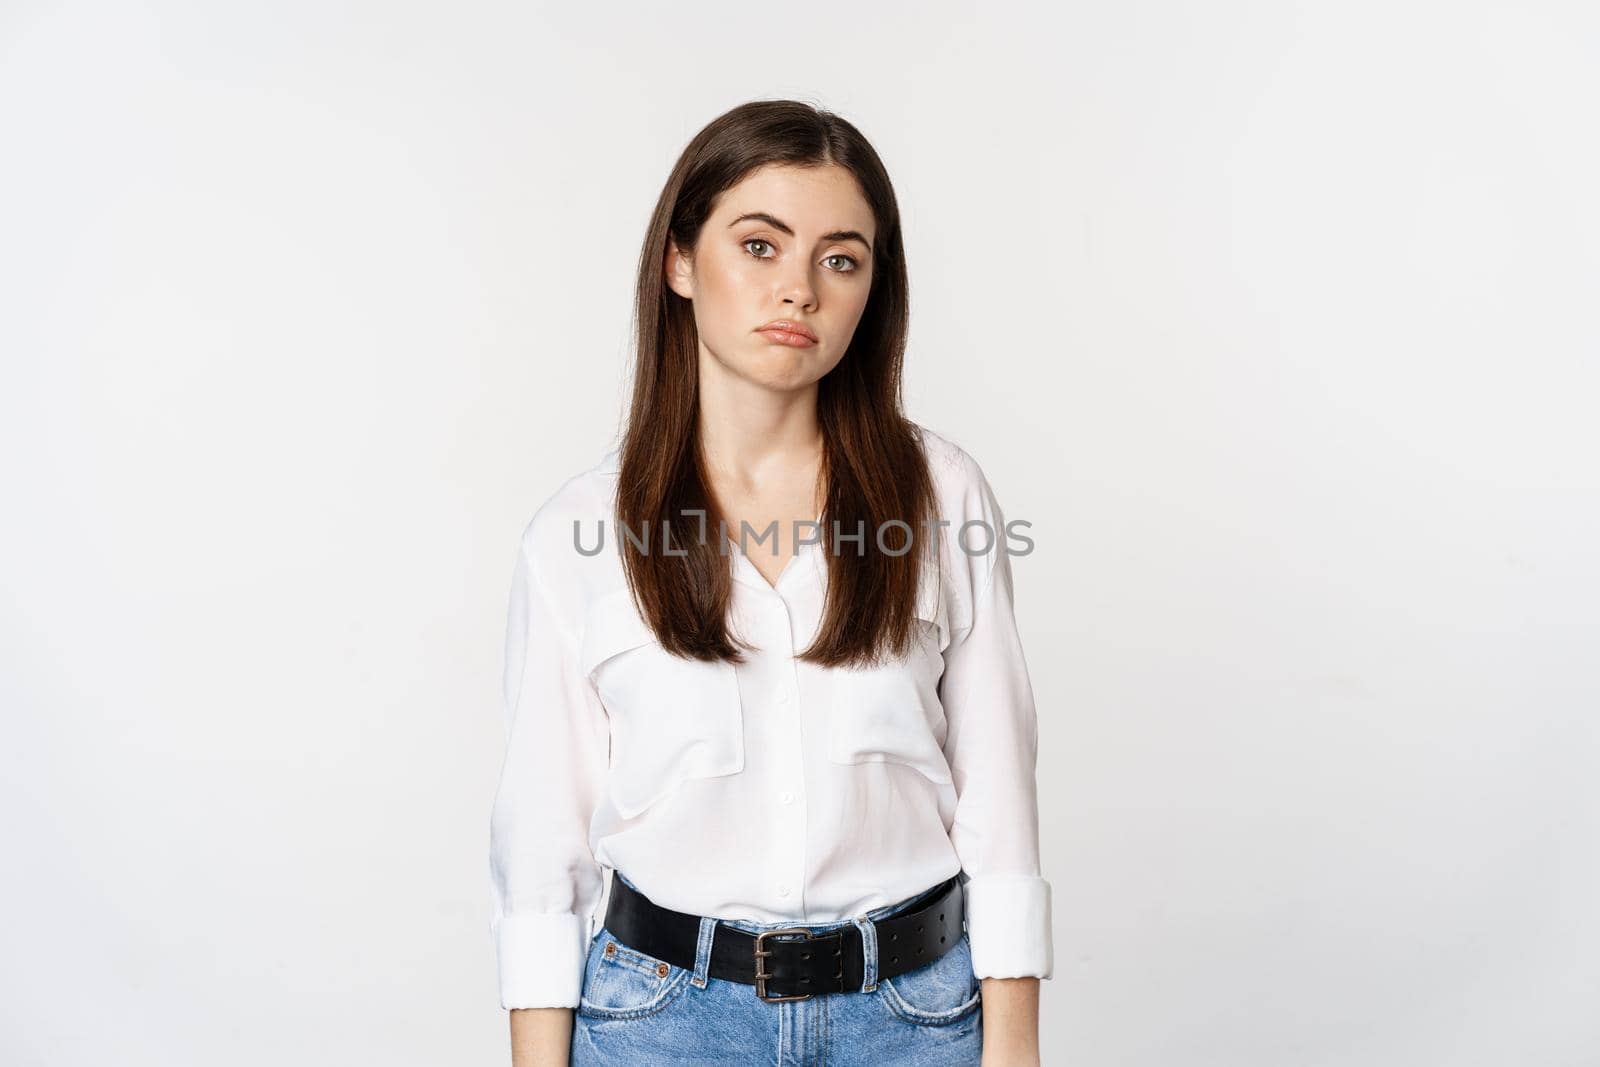 Sad and gloomy woman sulking, looking disappointed and moody, standing upset against white background.